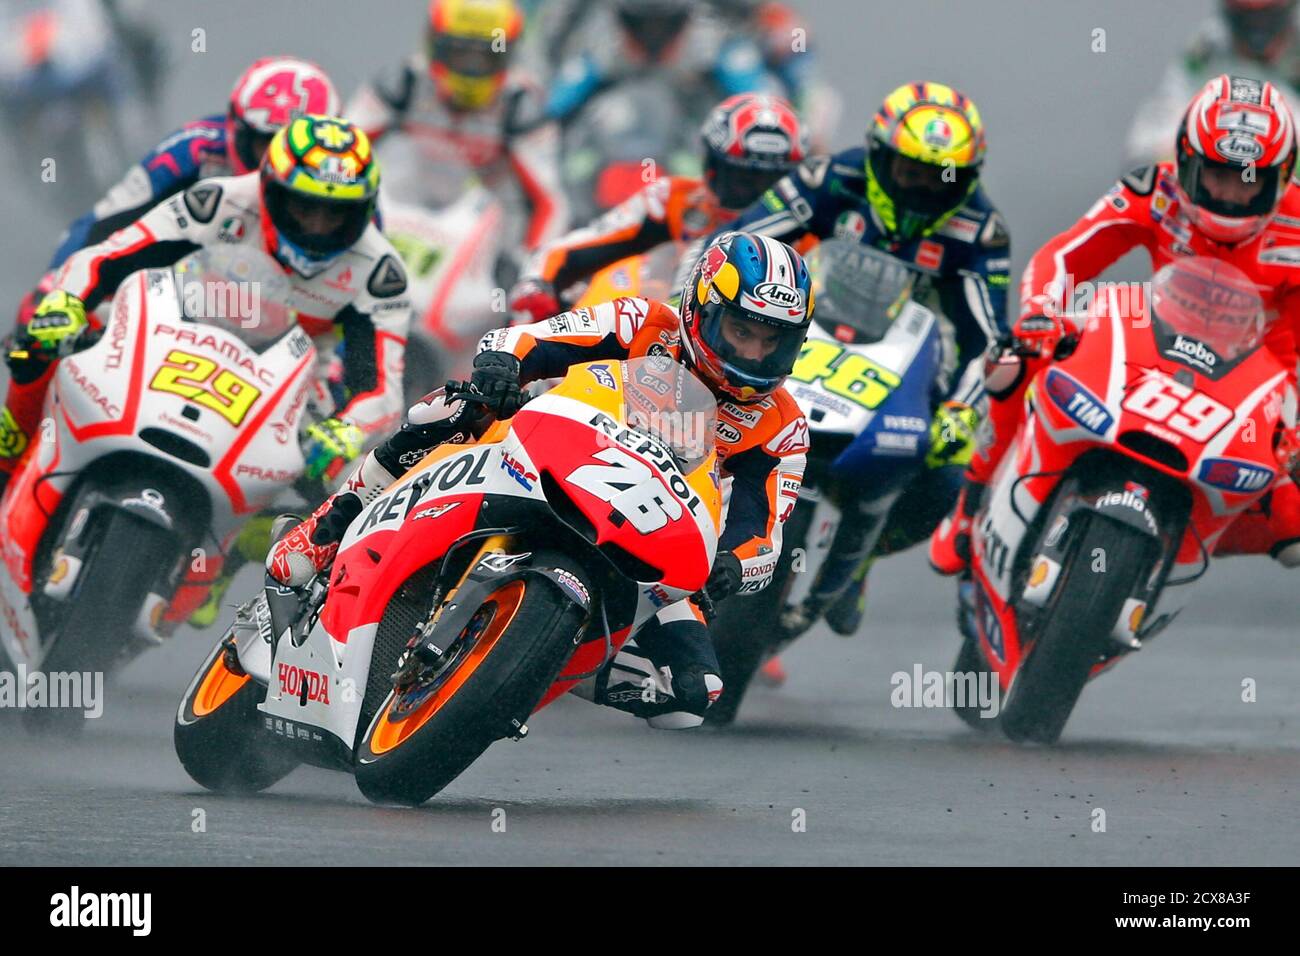 Honda MotoGP rider Dani Pedrosa (26) of Spain rides during the French Grand  Prix in Le Mans circuit, central France May 19, 2013. REUTERS/Benoit Tessier  (FRANCE - Tags: SPORT MOTORSPORT Stock Photo - Alamy